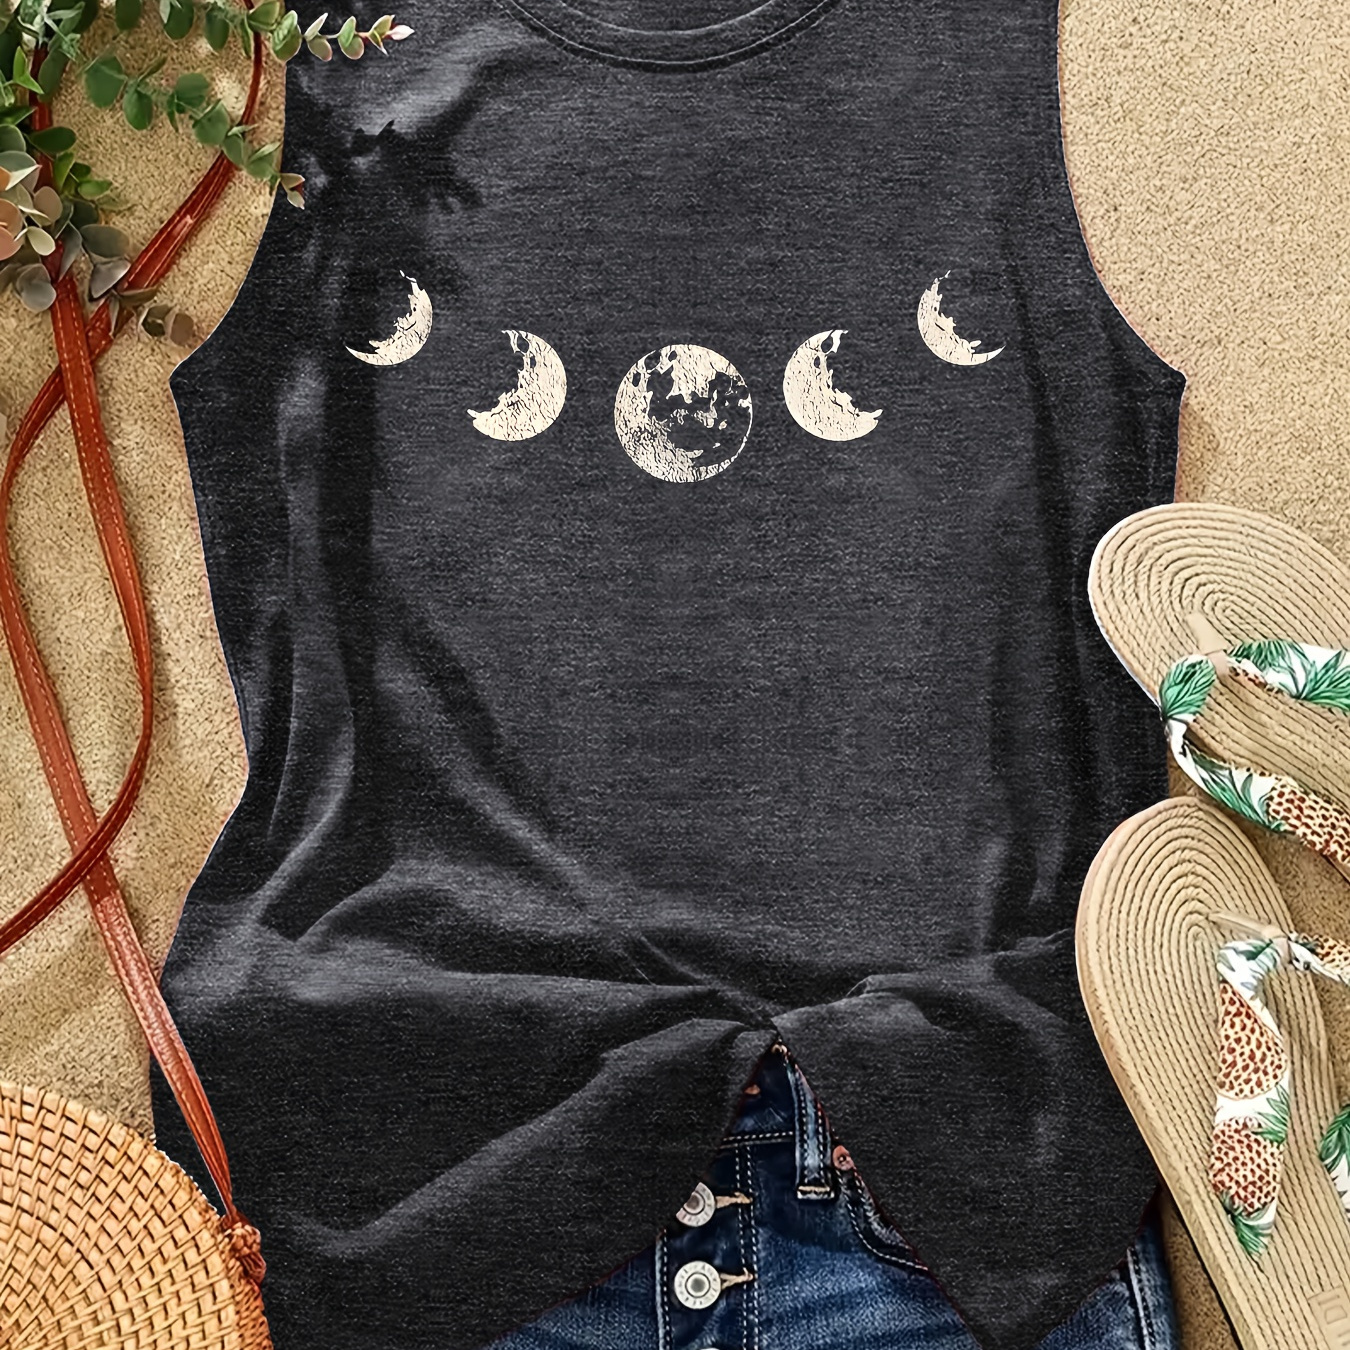 

Moon Graphic Print Tank Top, Sleeveless Crew Neck Casual Top For Summer & Spring, Women's Clothing